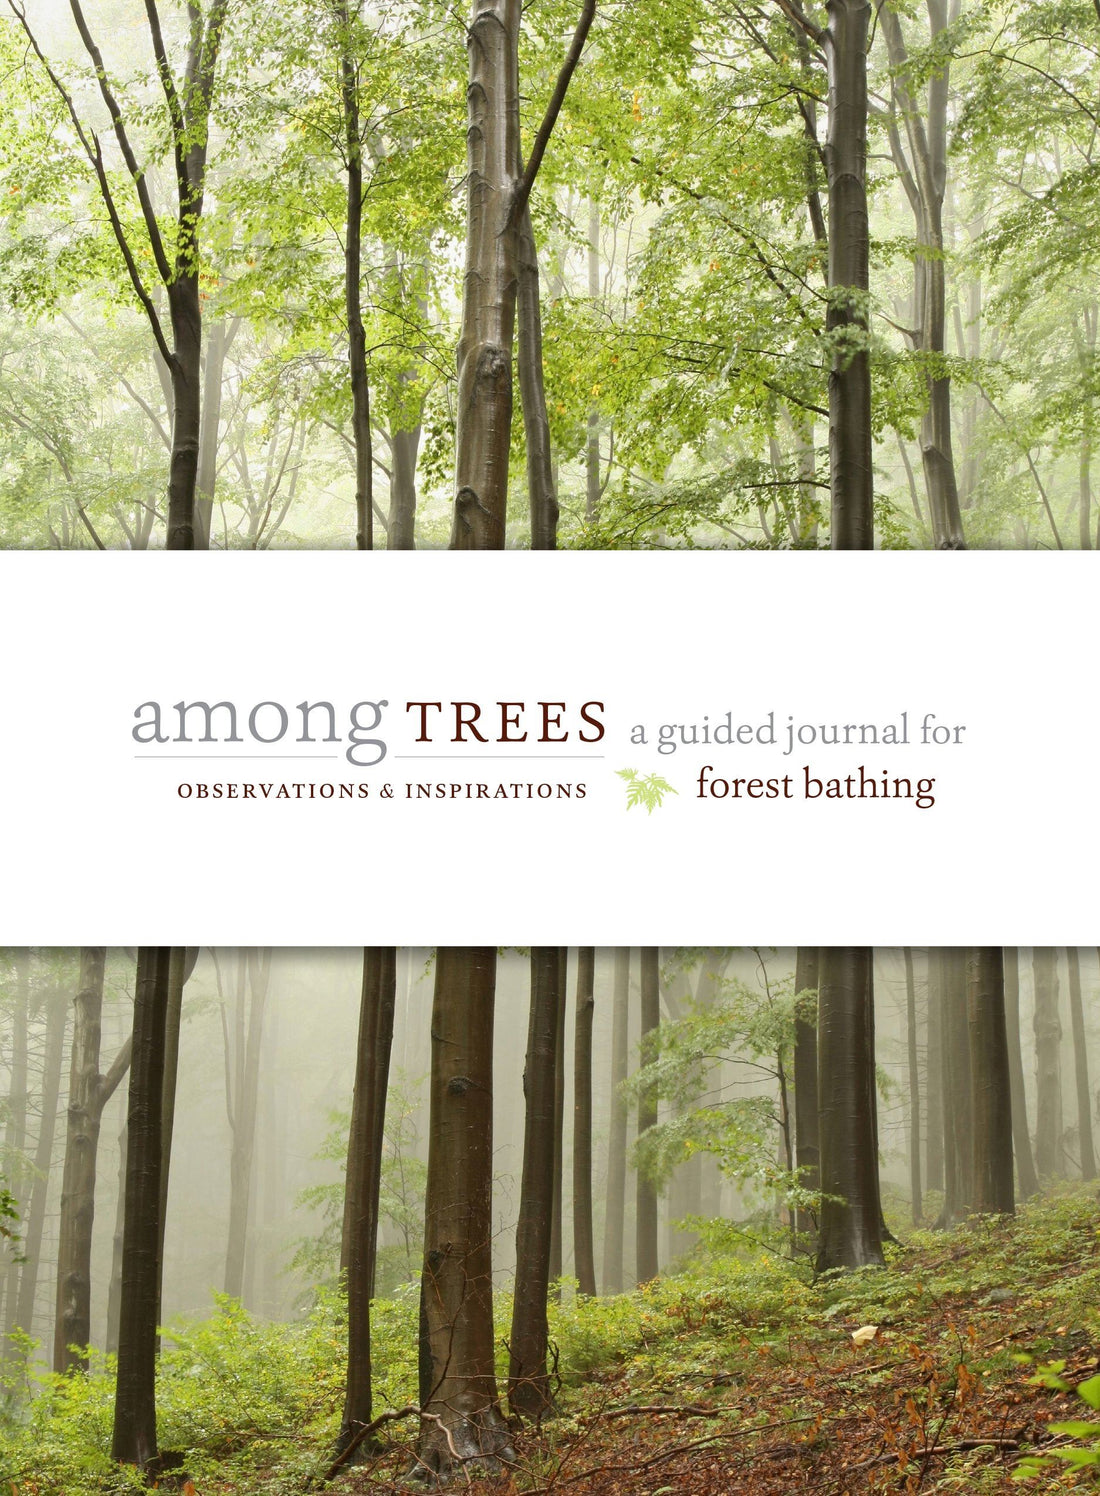 Among Trees: A Guided Journal for Forest Bathing by Timber Press